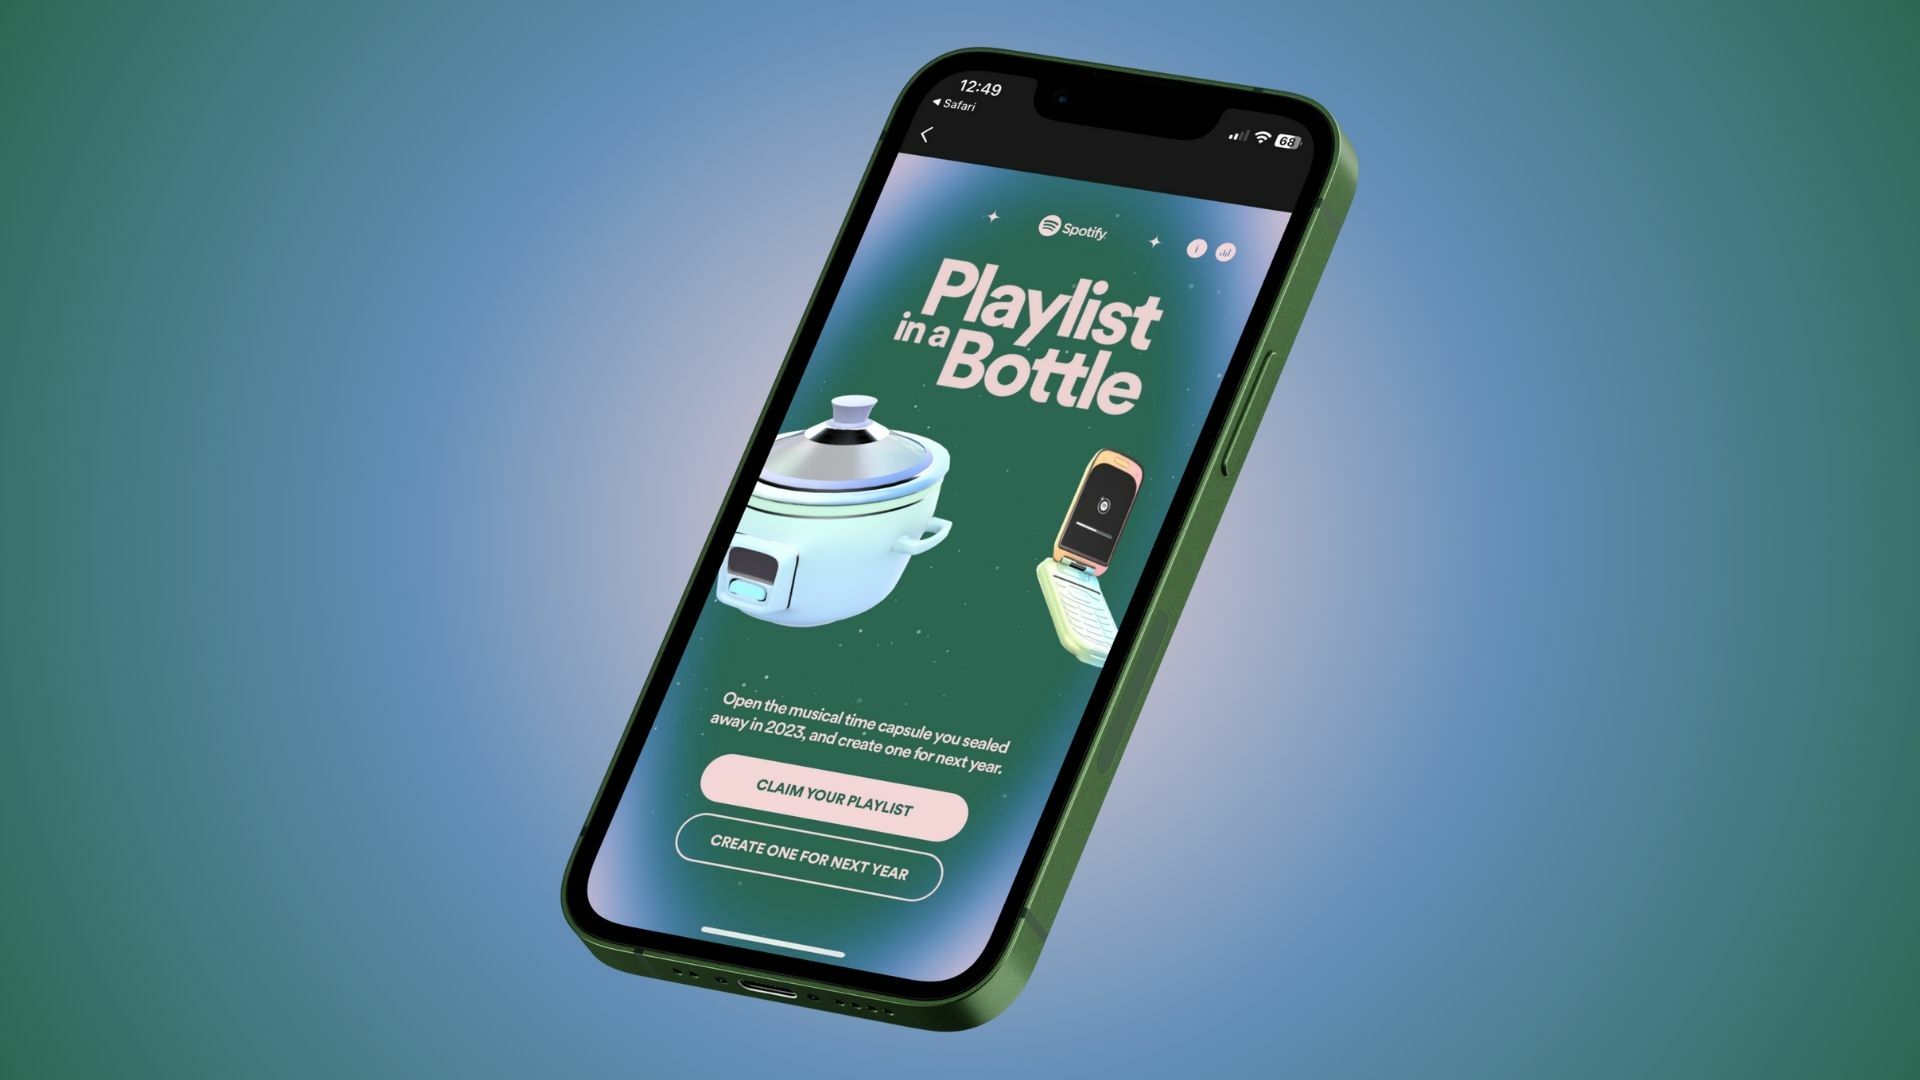 A mockup of the Spotify Playlist in a Bottle seen on a smartphone screen.